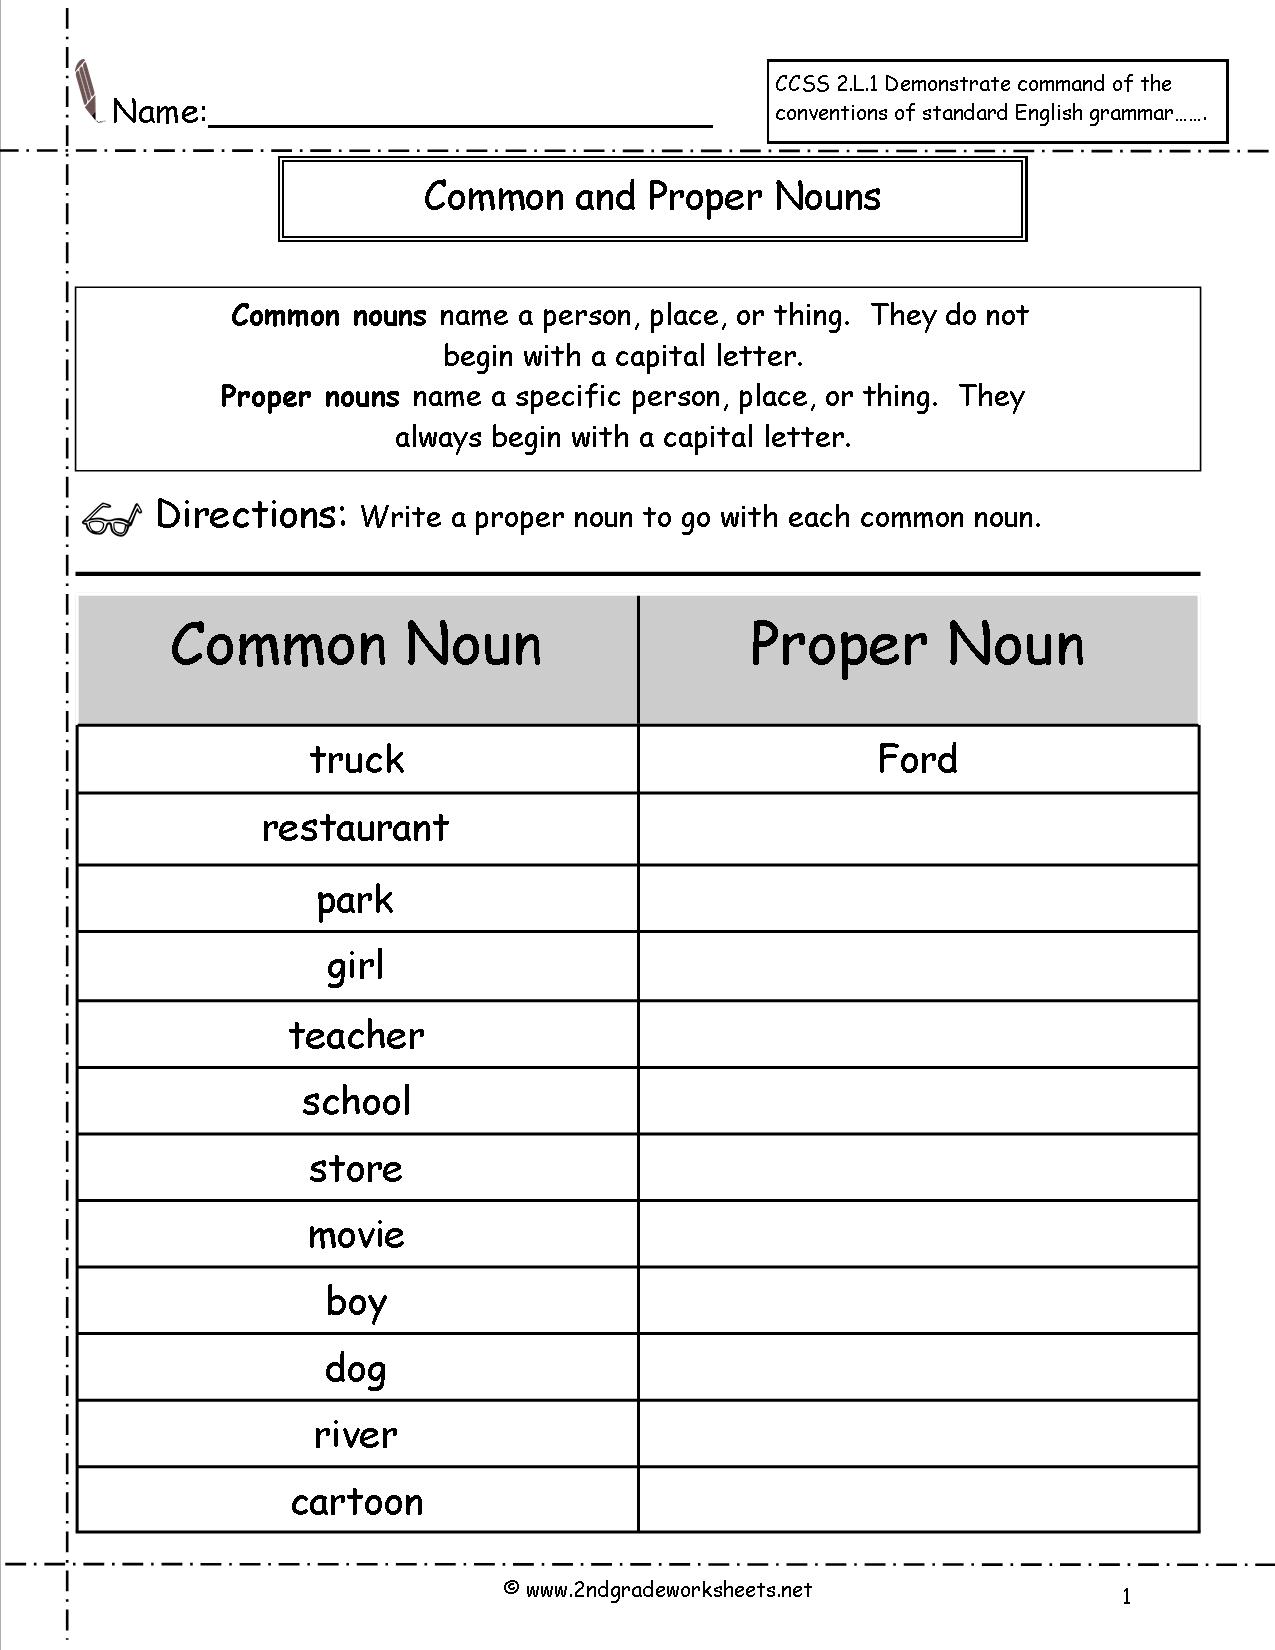 19 Best Images Of 2nd Grade English Worksheets Nouns Verbs Printable Verbs Worksheets 4th